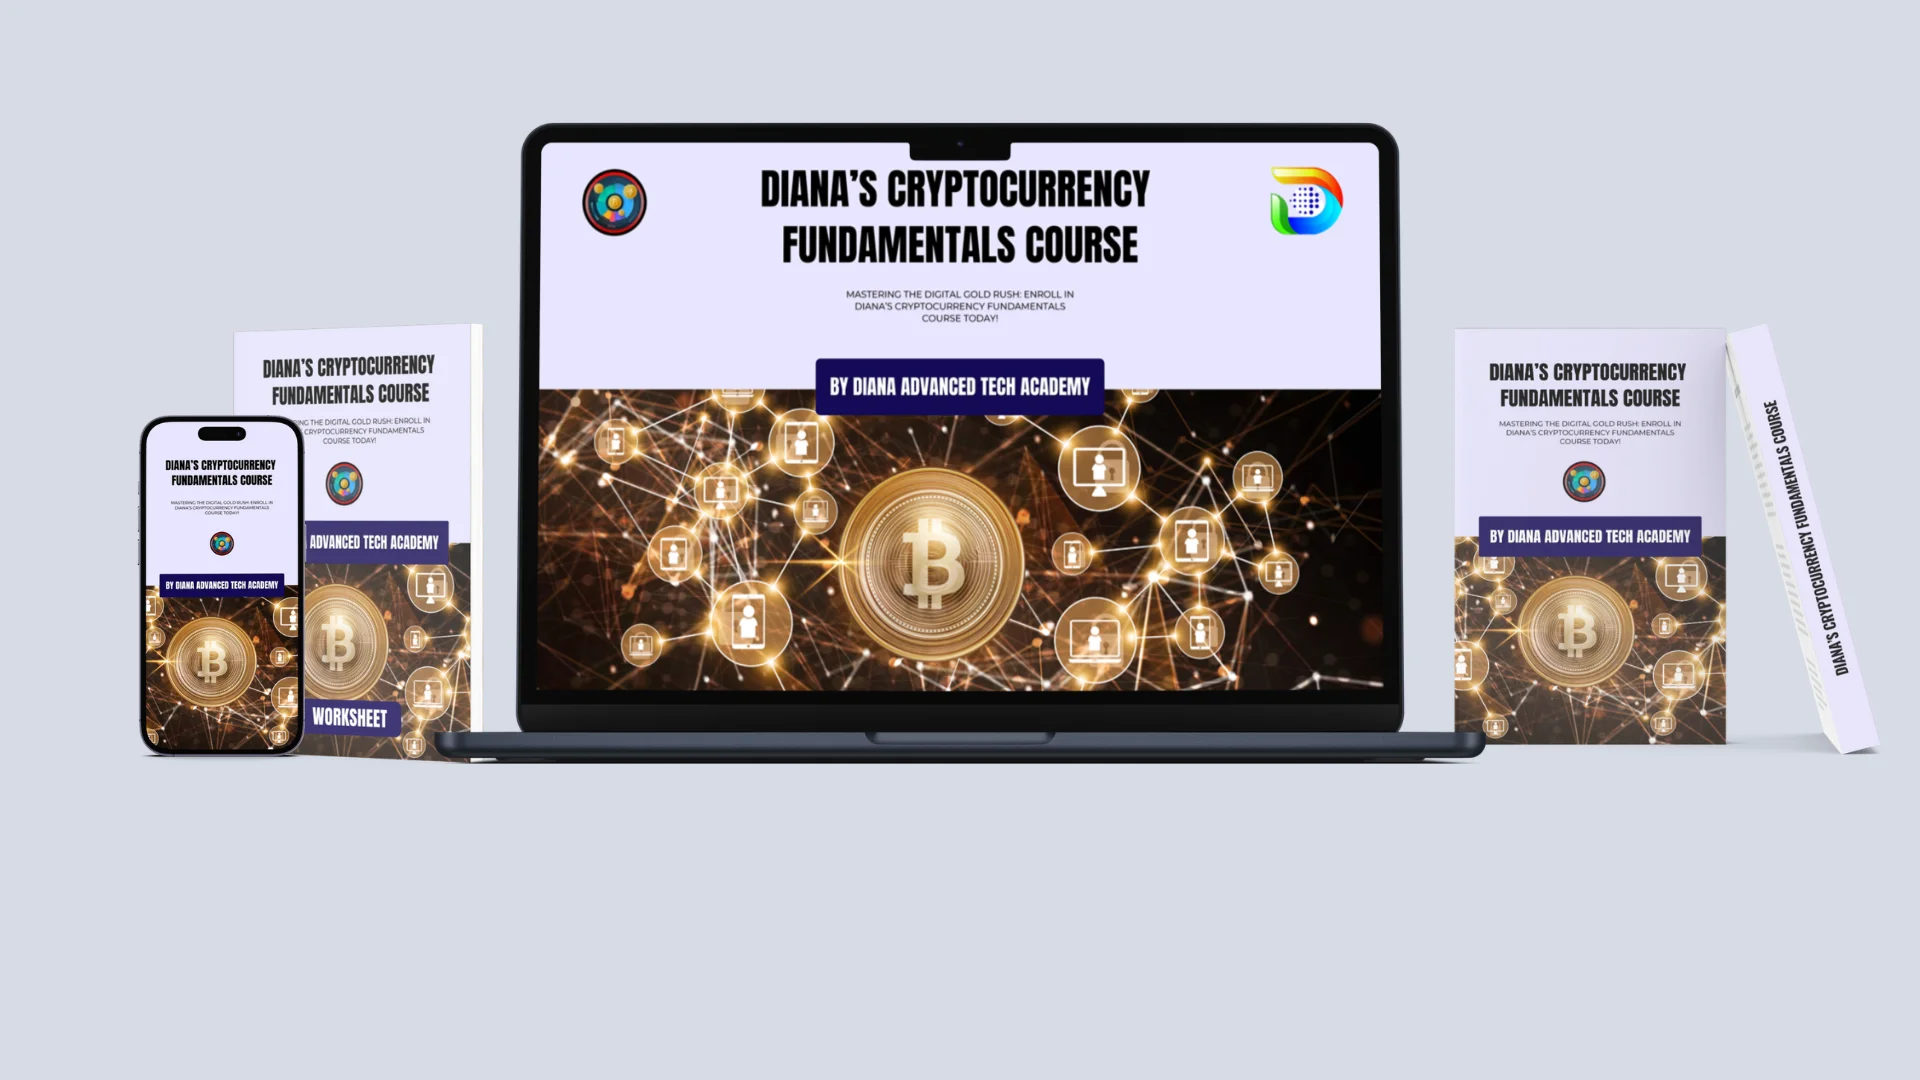 DIANA’S CRYPTOCURRENCENCY FUNDAMENTALS COURSE (DCFC)